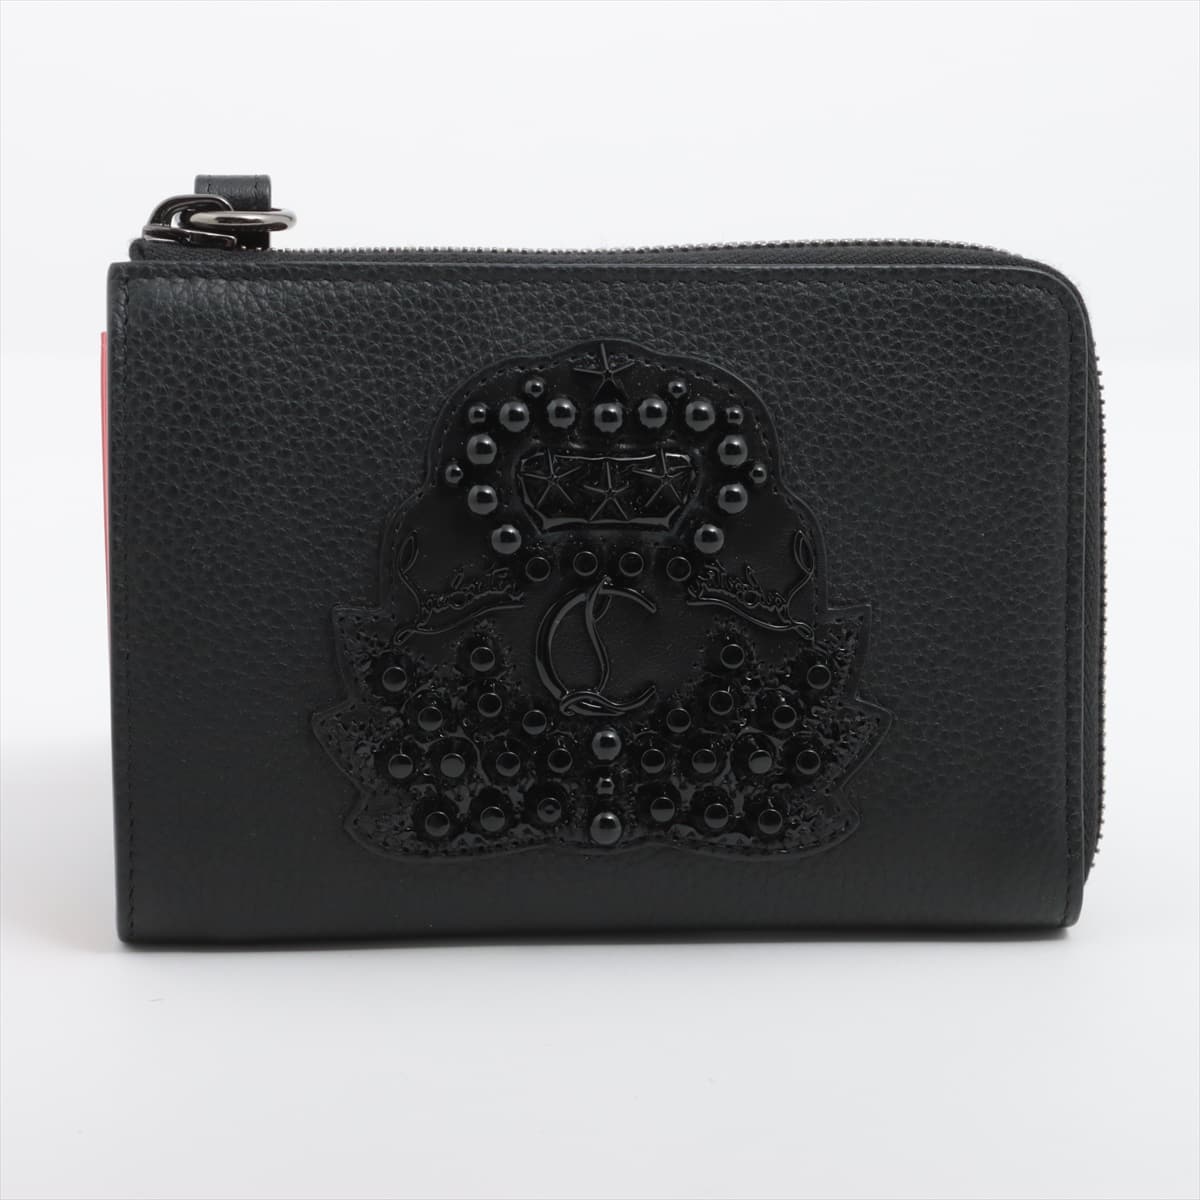 Christian Louboutin Studs Leather Compact Wallet Black